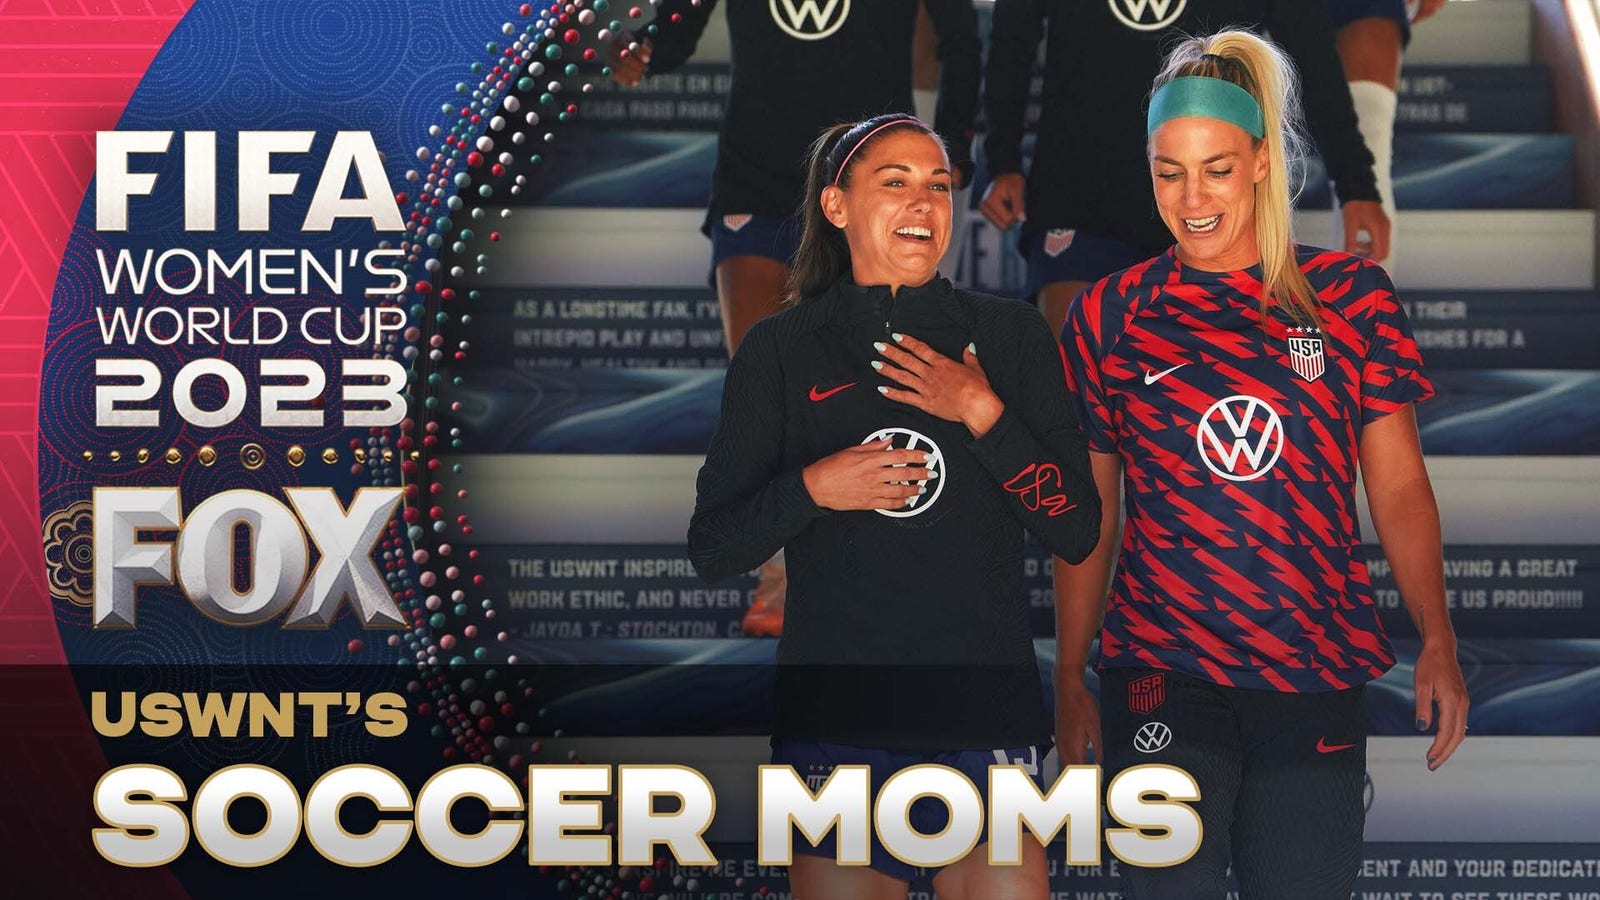 "When I'm home, I'm just mom" — Alex Morgan, Julie Ertz and Crystal Dunn reflect on being first-time mothers at the World Cup